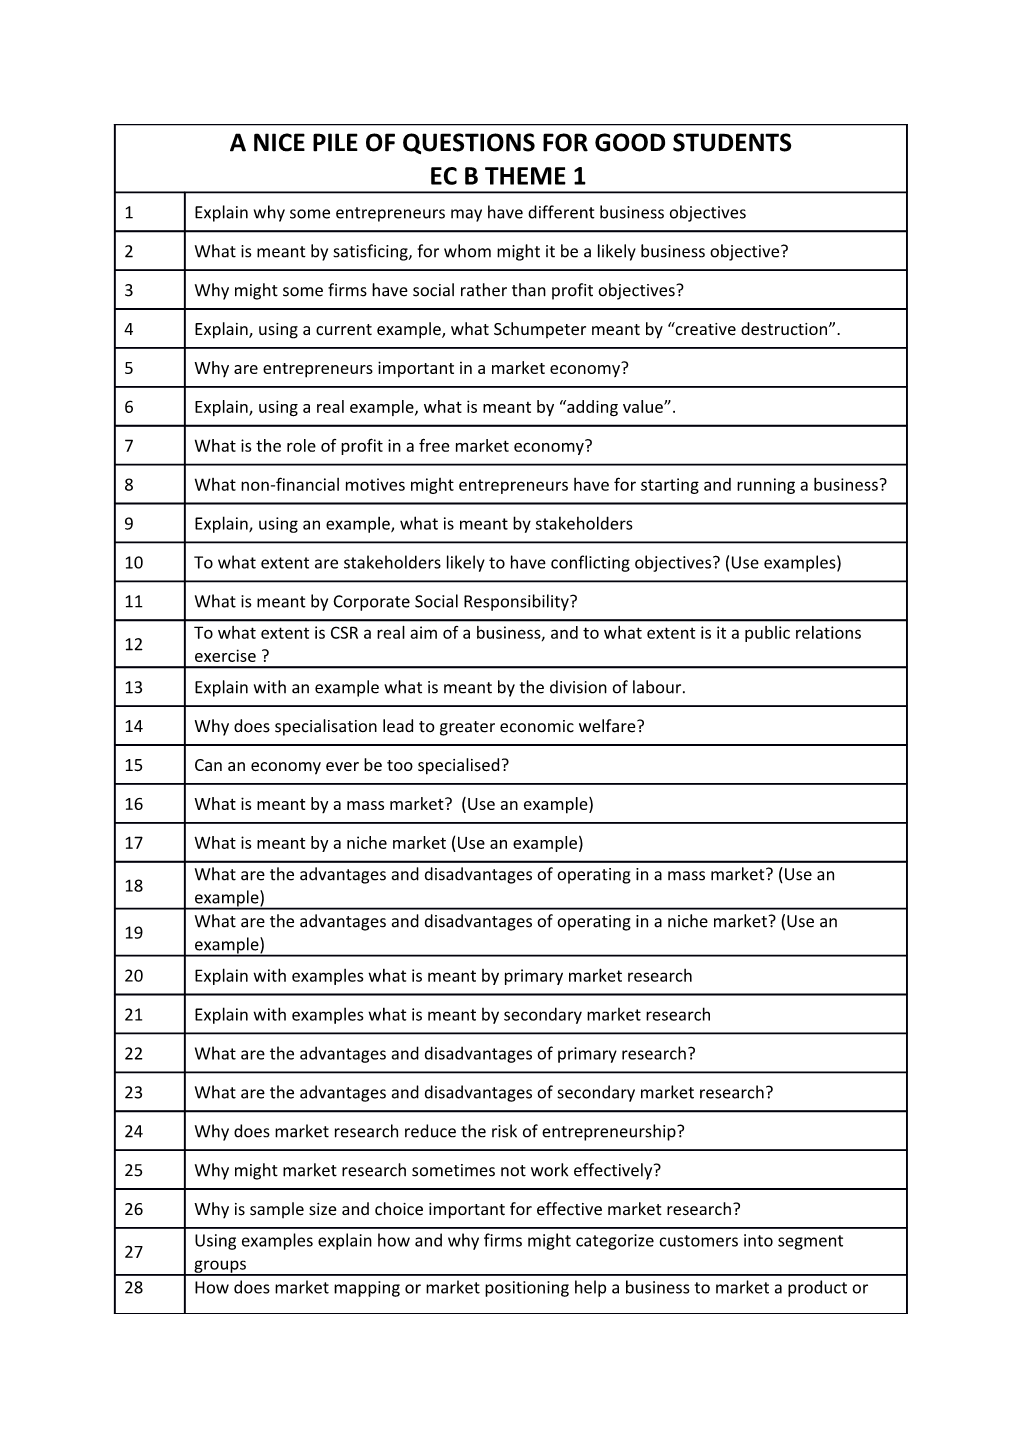 A Nice Pile of Questions for Good Students Ec B Theme 1